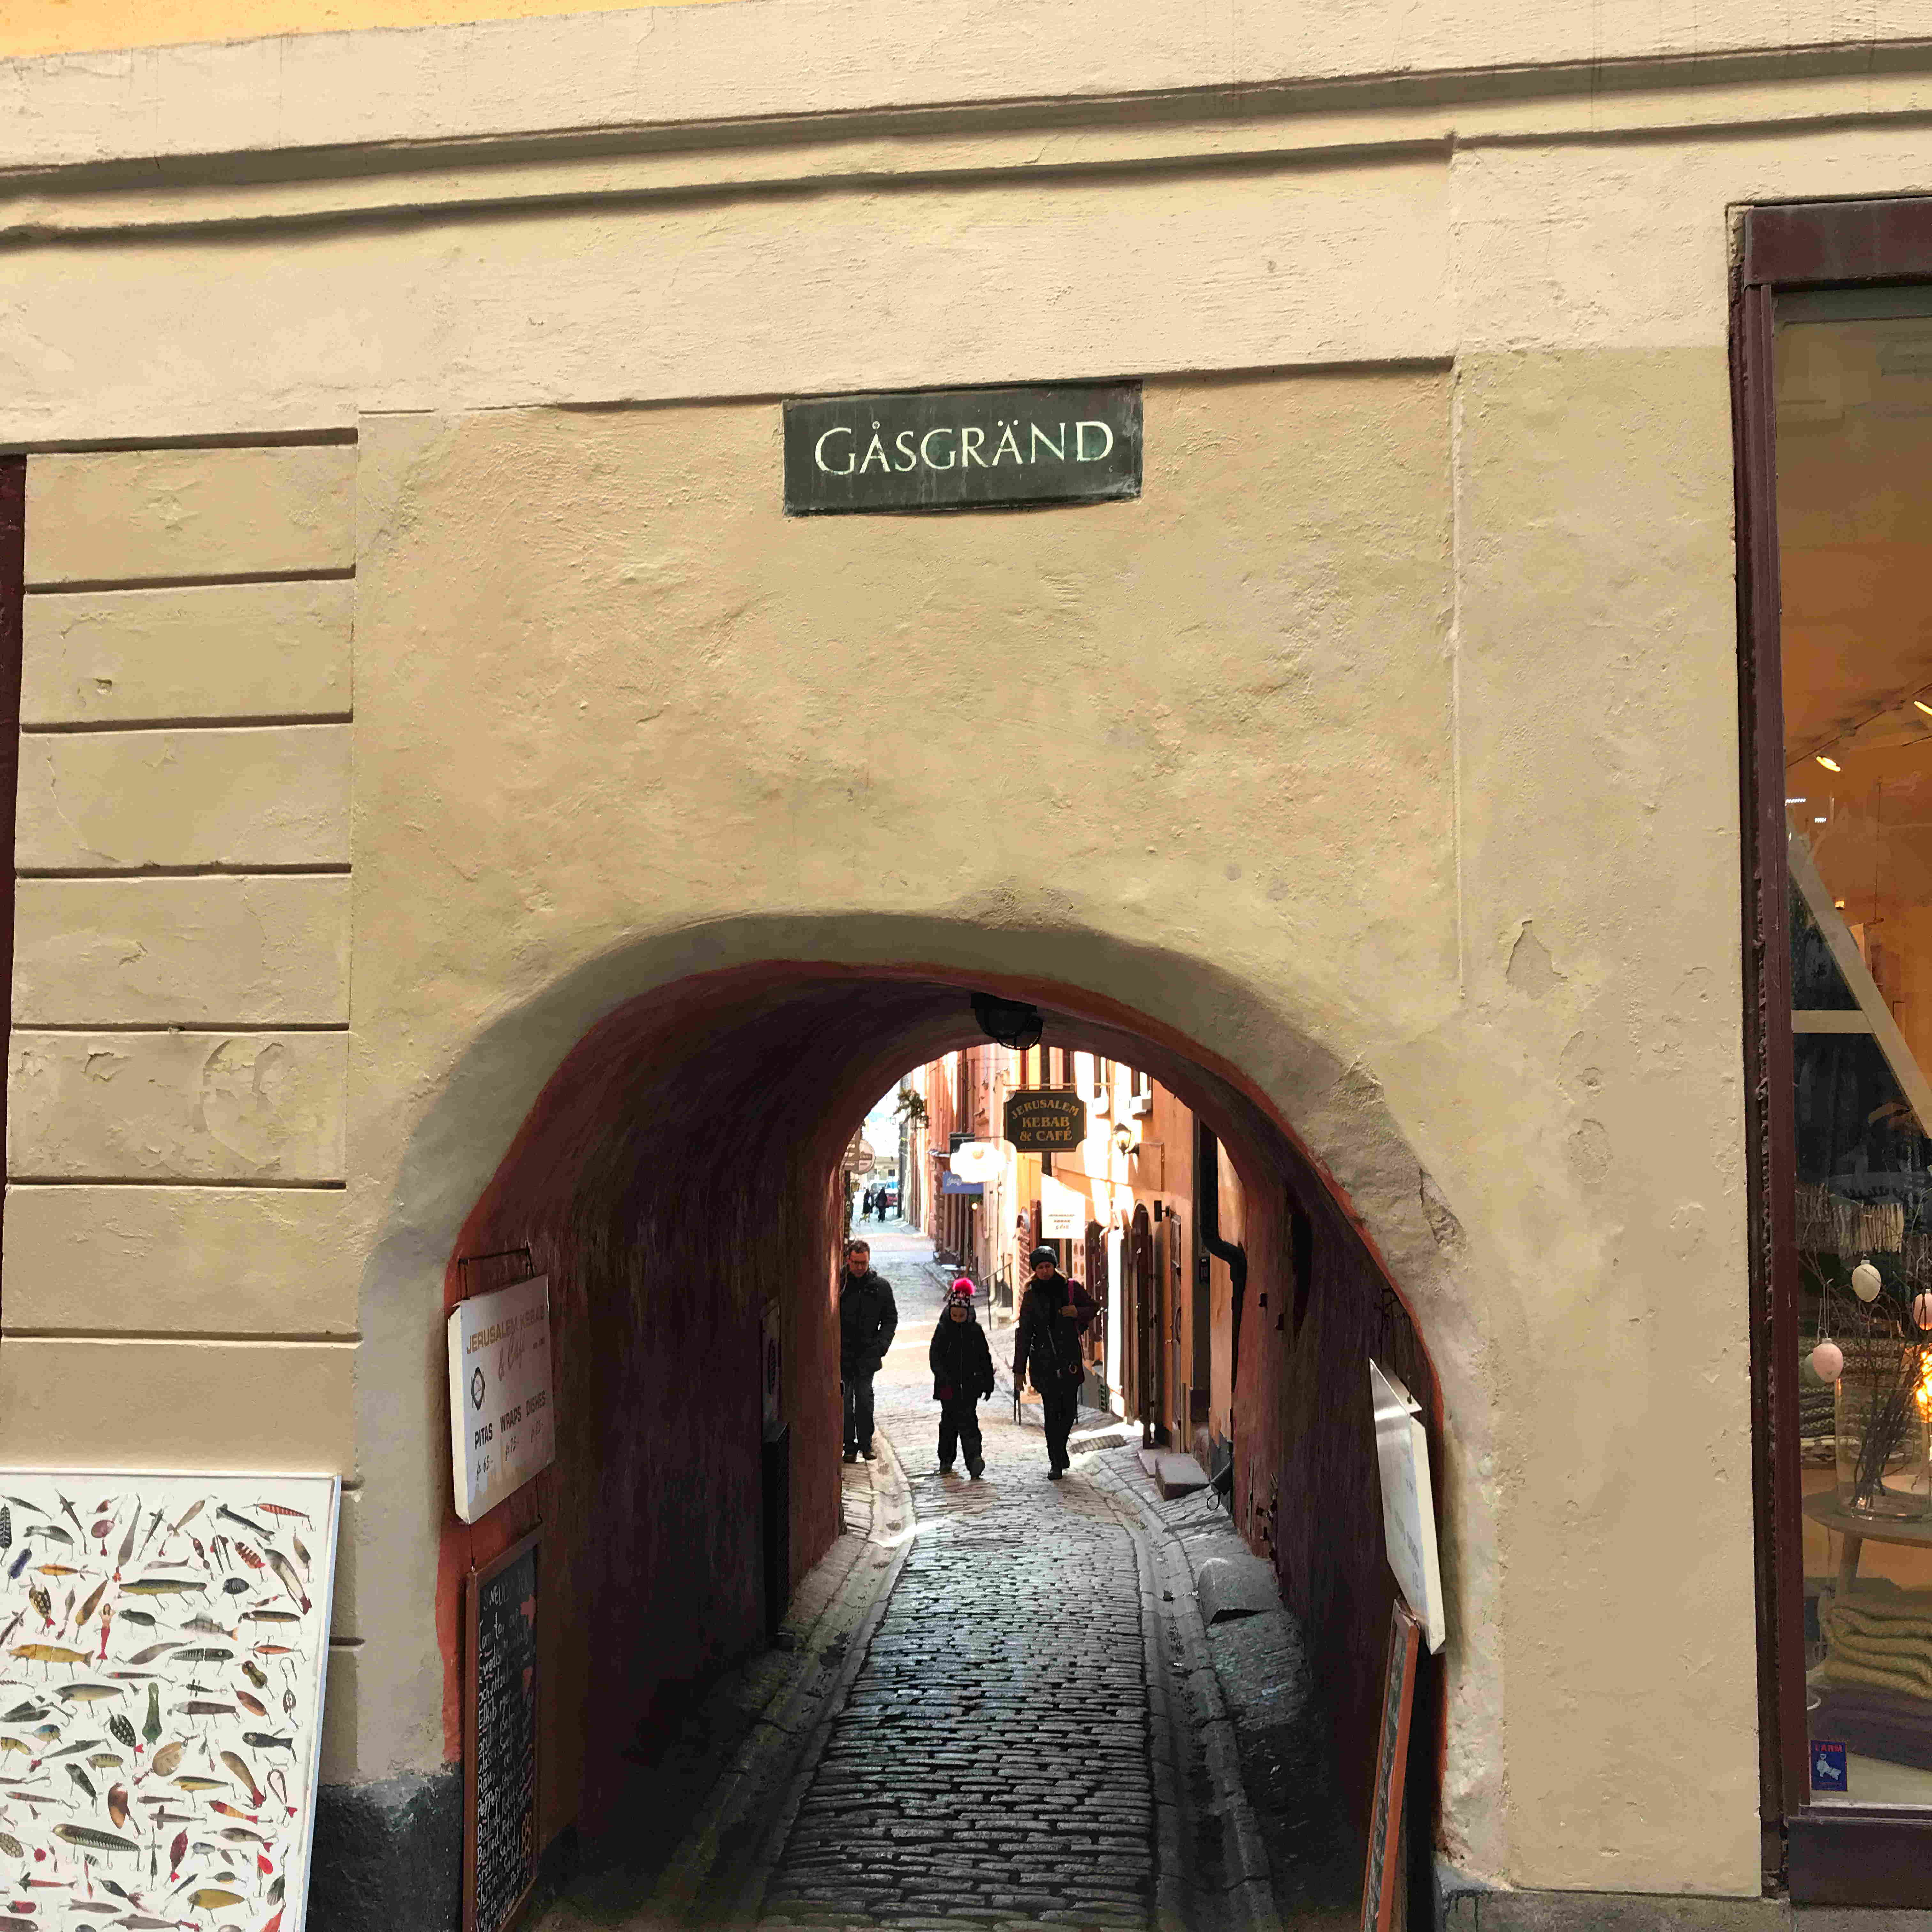 Archway to Gasgrand